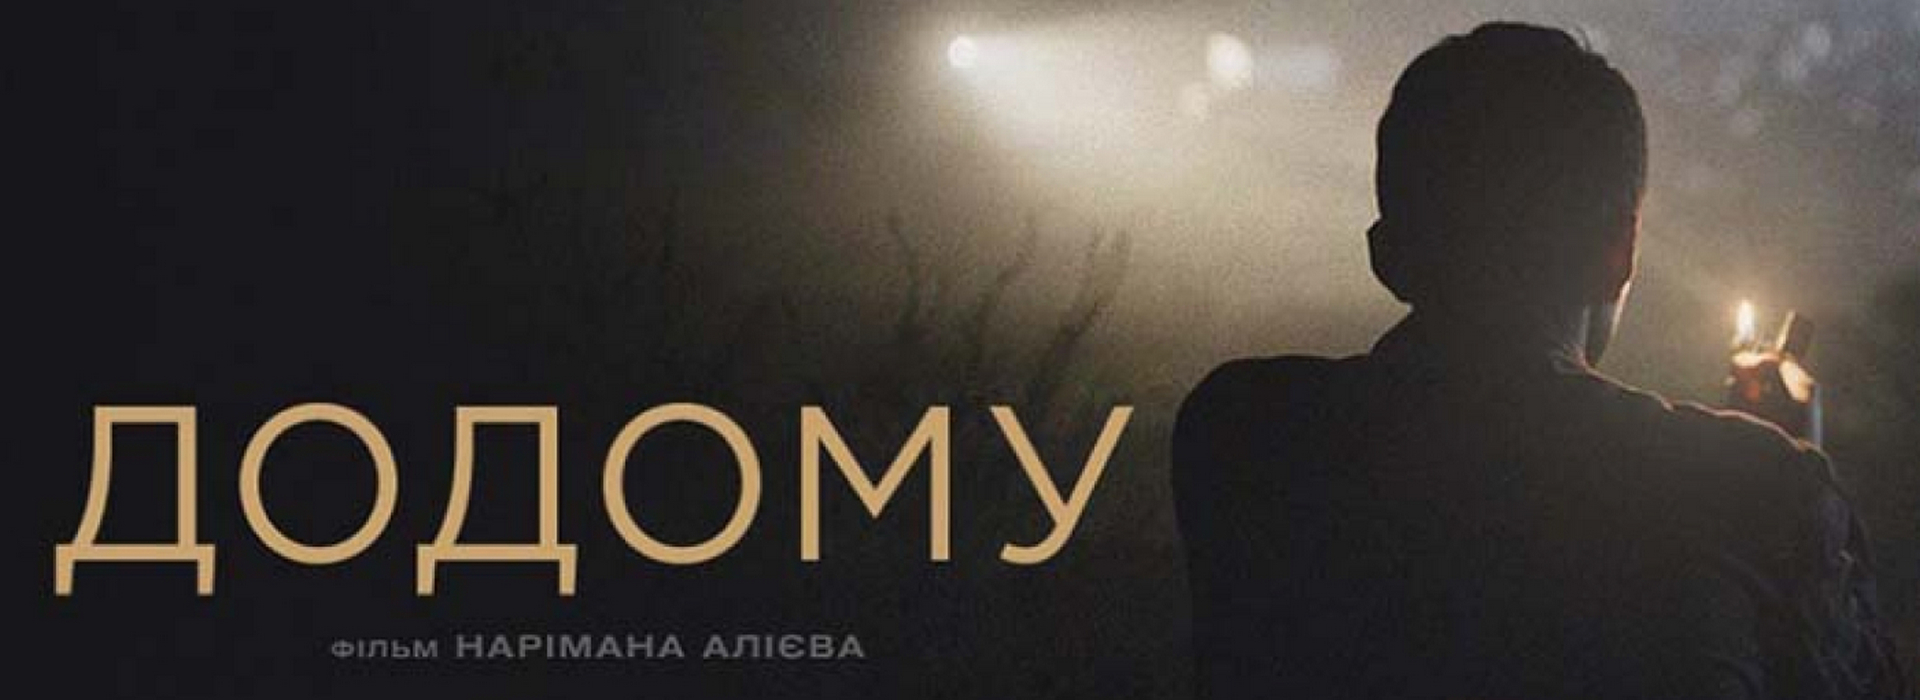 Ukraine Is Waiting for Crimea “Home”. SWEET.TV Starts a Free Screening of Nariman Aliyev’s Film on the Peninsula